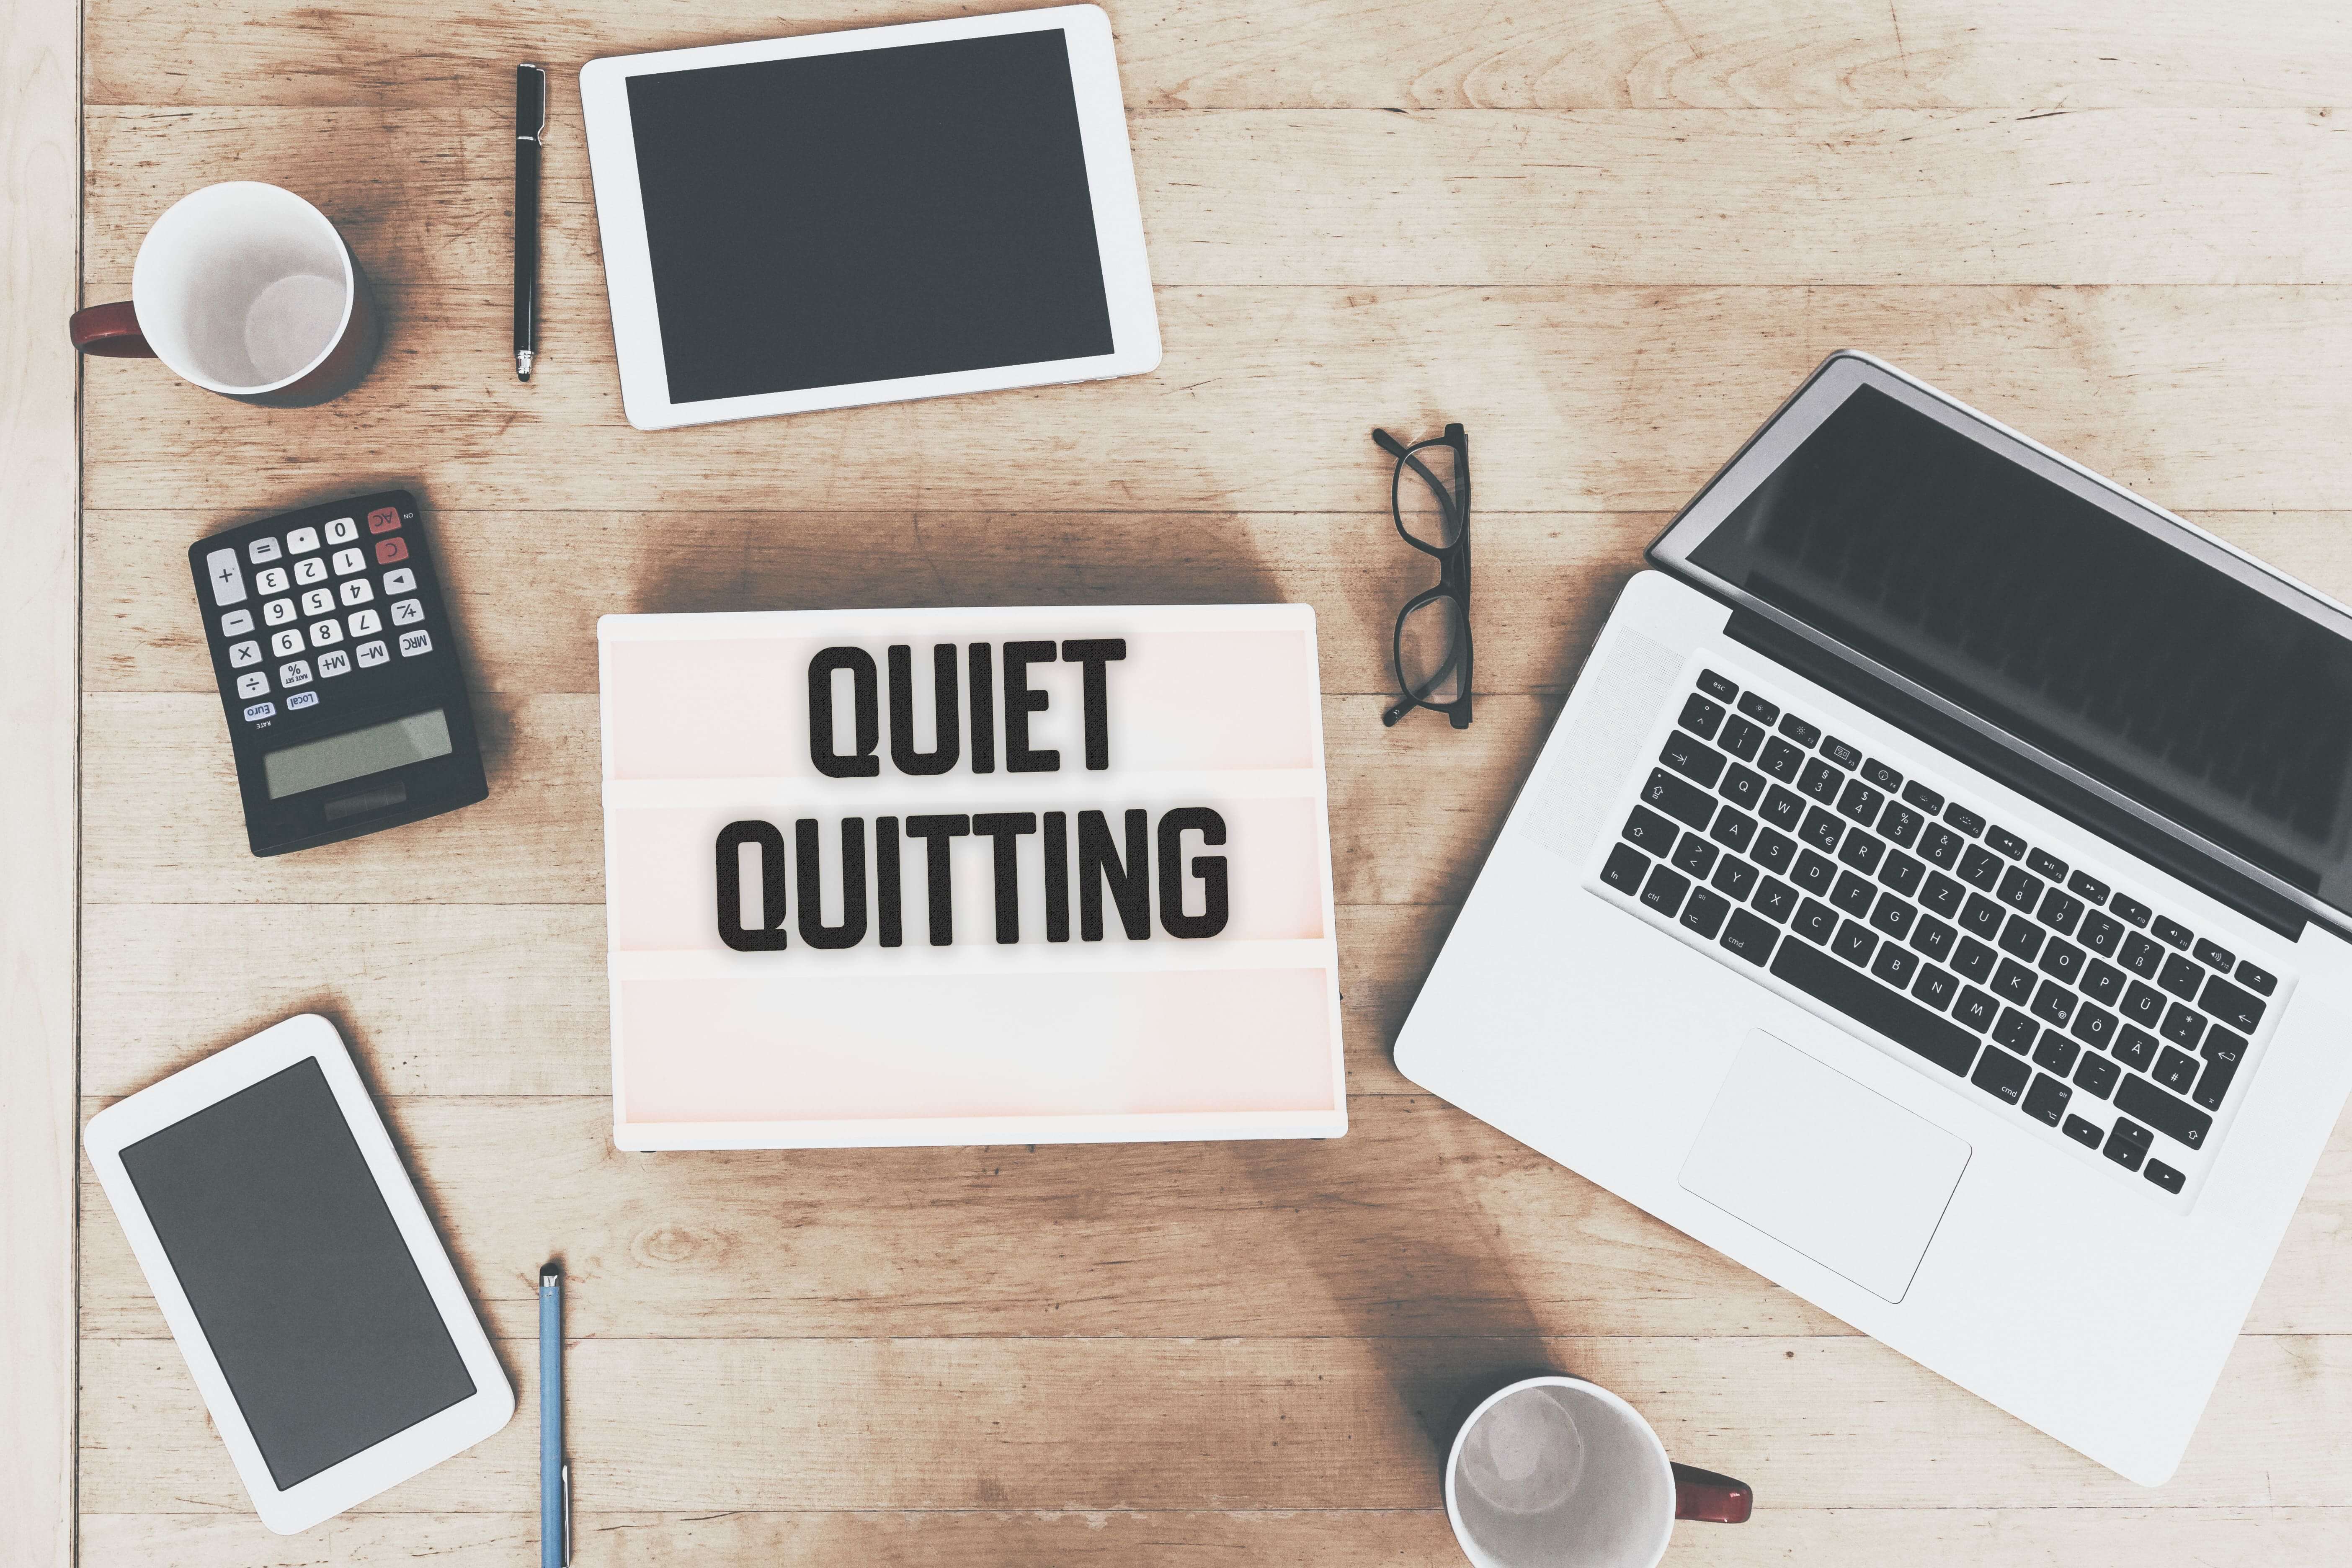 quiet-quitting-message-text-in-vintage-style-light-2022-09-30-22-15-30-utc